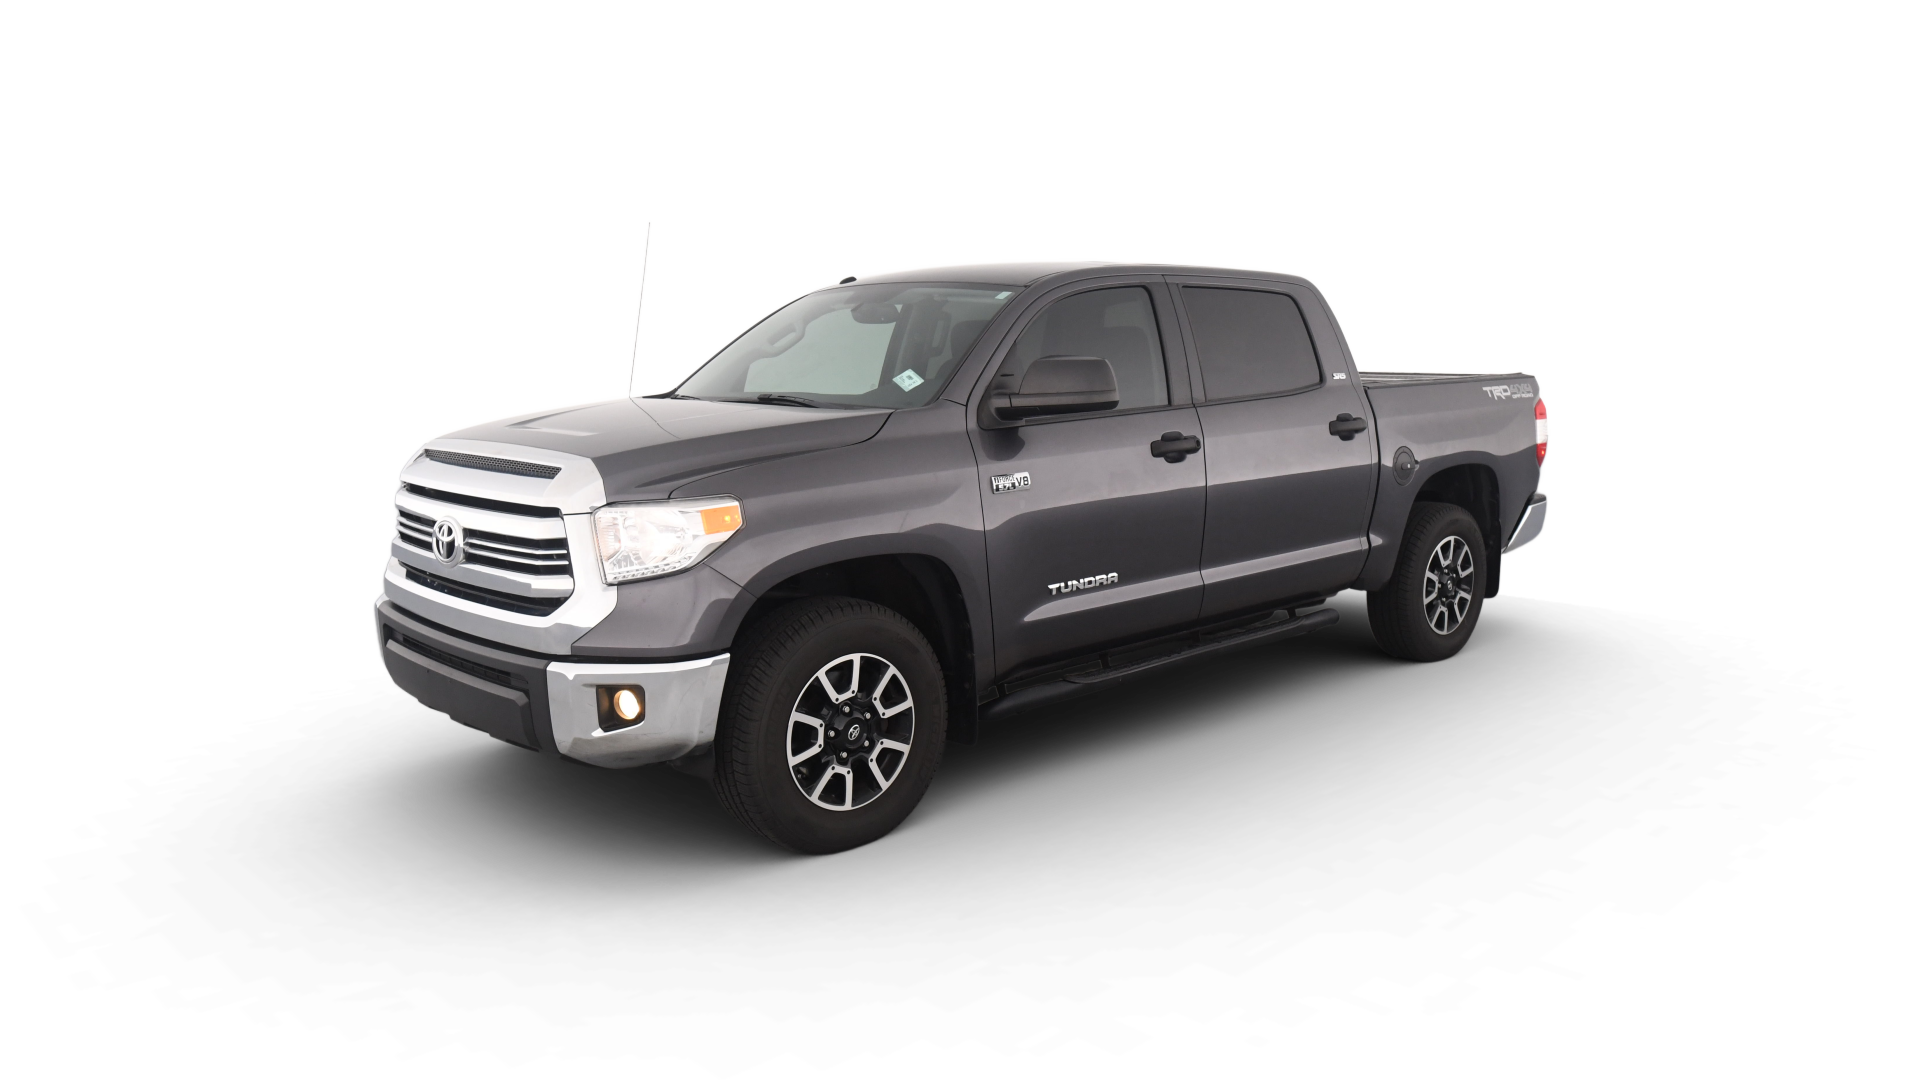 Used 2016 Toyota Tundra for Sale Online | Carvana